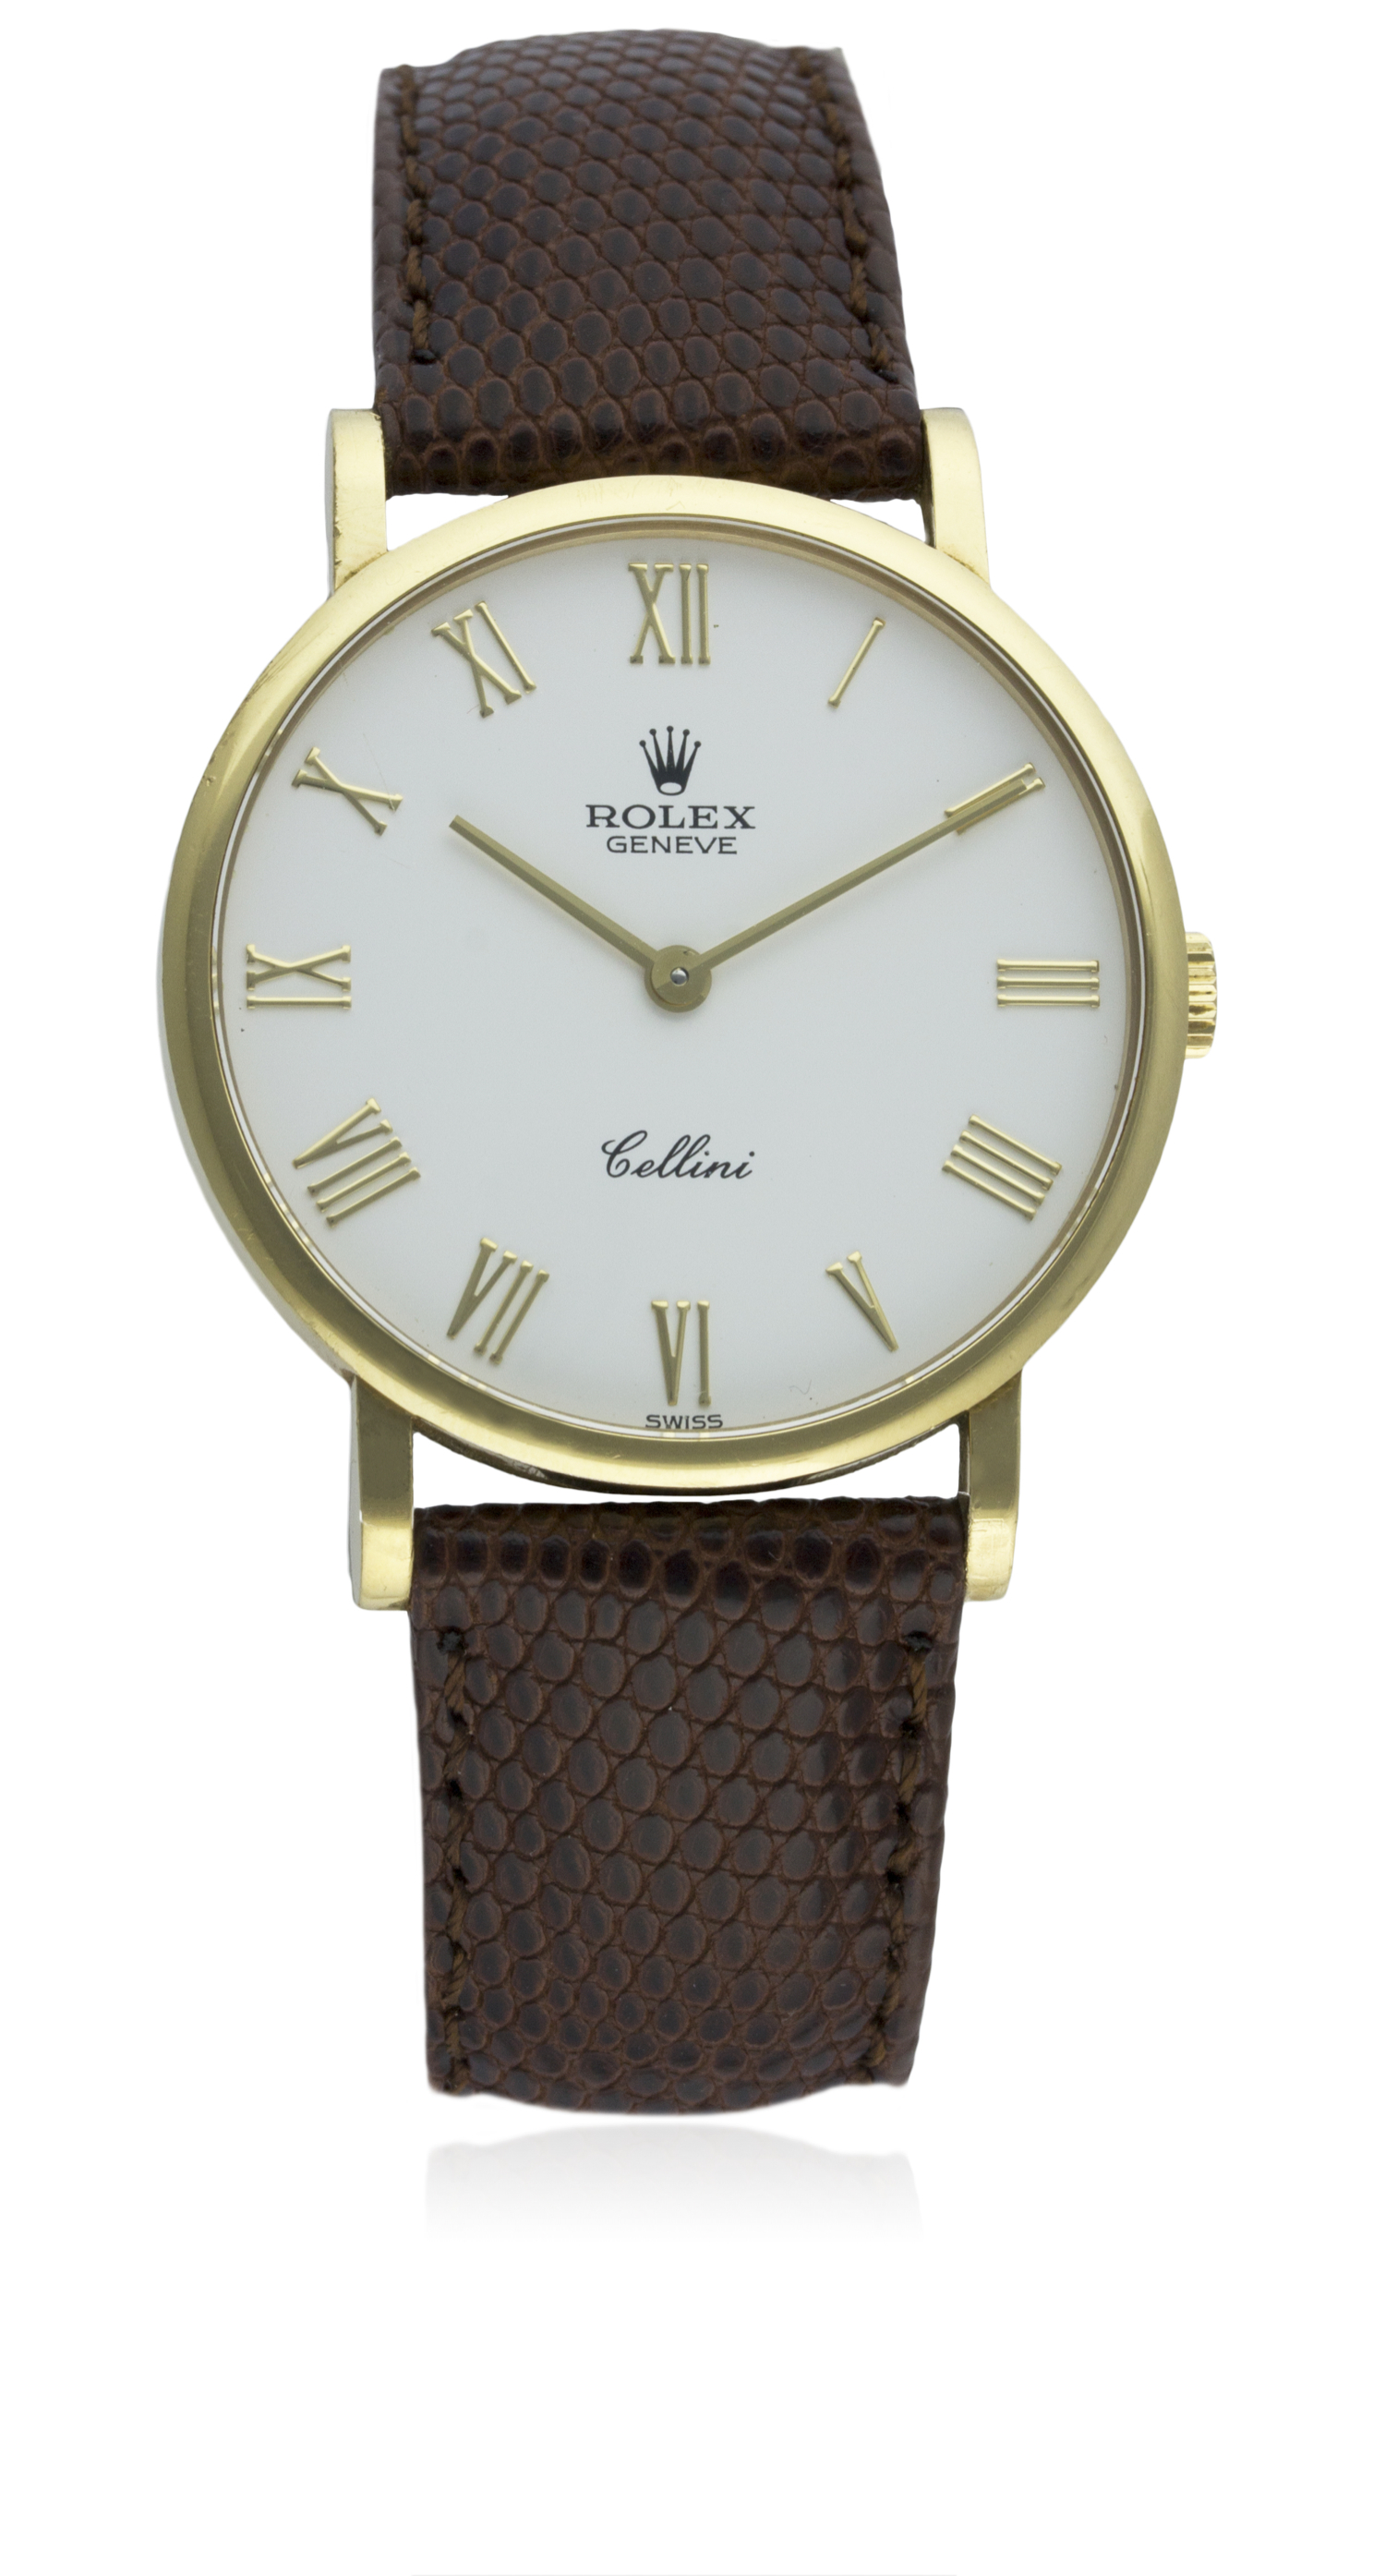 A GENTLEMAN'S 18K SOLID GOLD ROLEX CELLINI WRIST WATCH CIRCA 2000, REF. 5112 D: White dial with gold